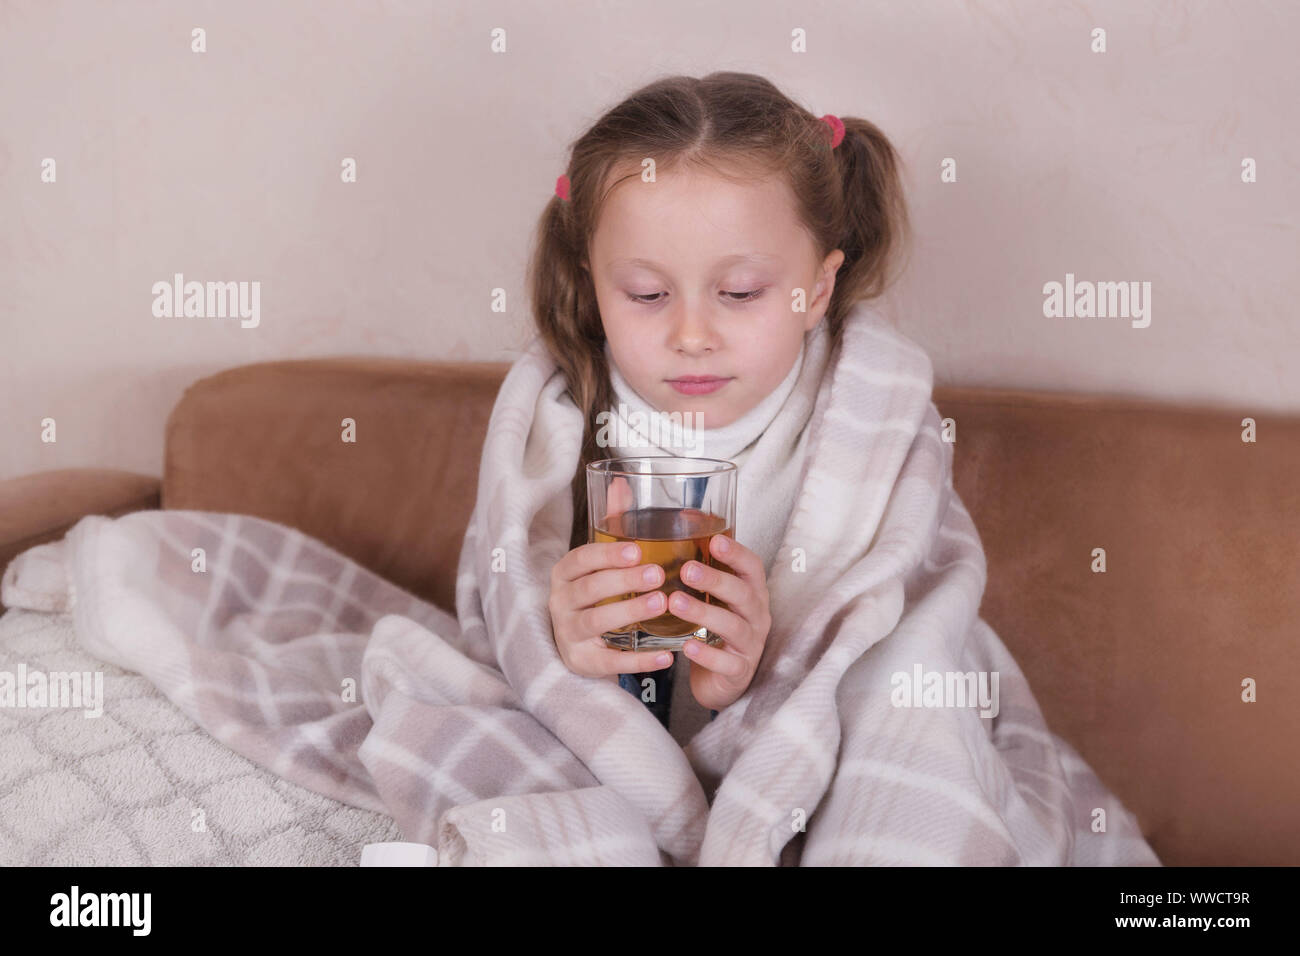 Child taking medicine. Sick girl with scarf lying on bed Stock Photo